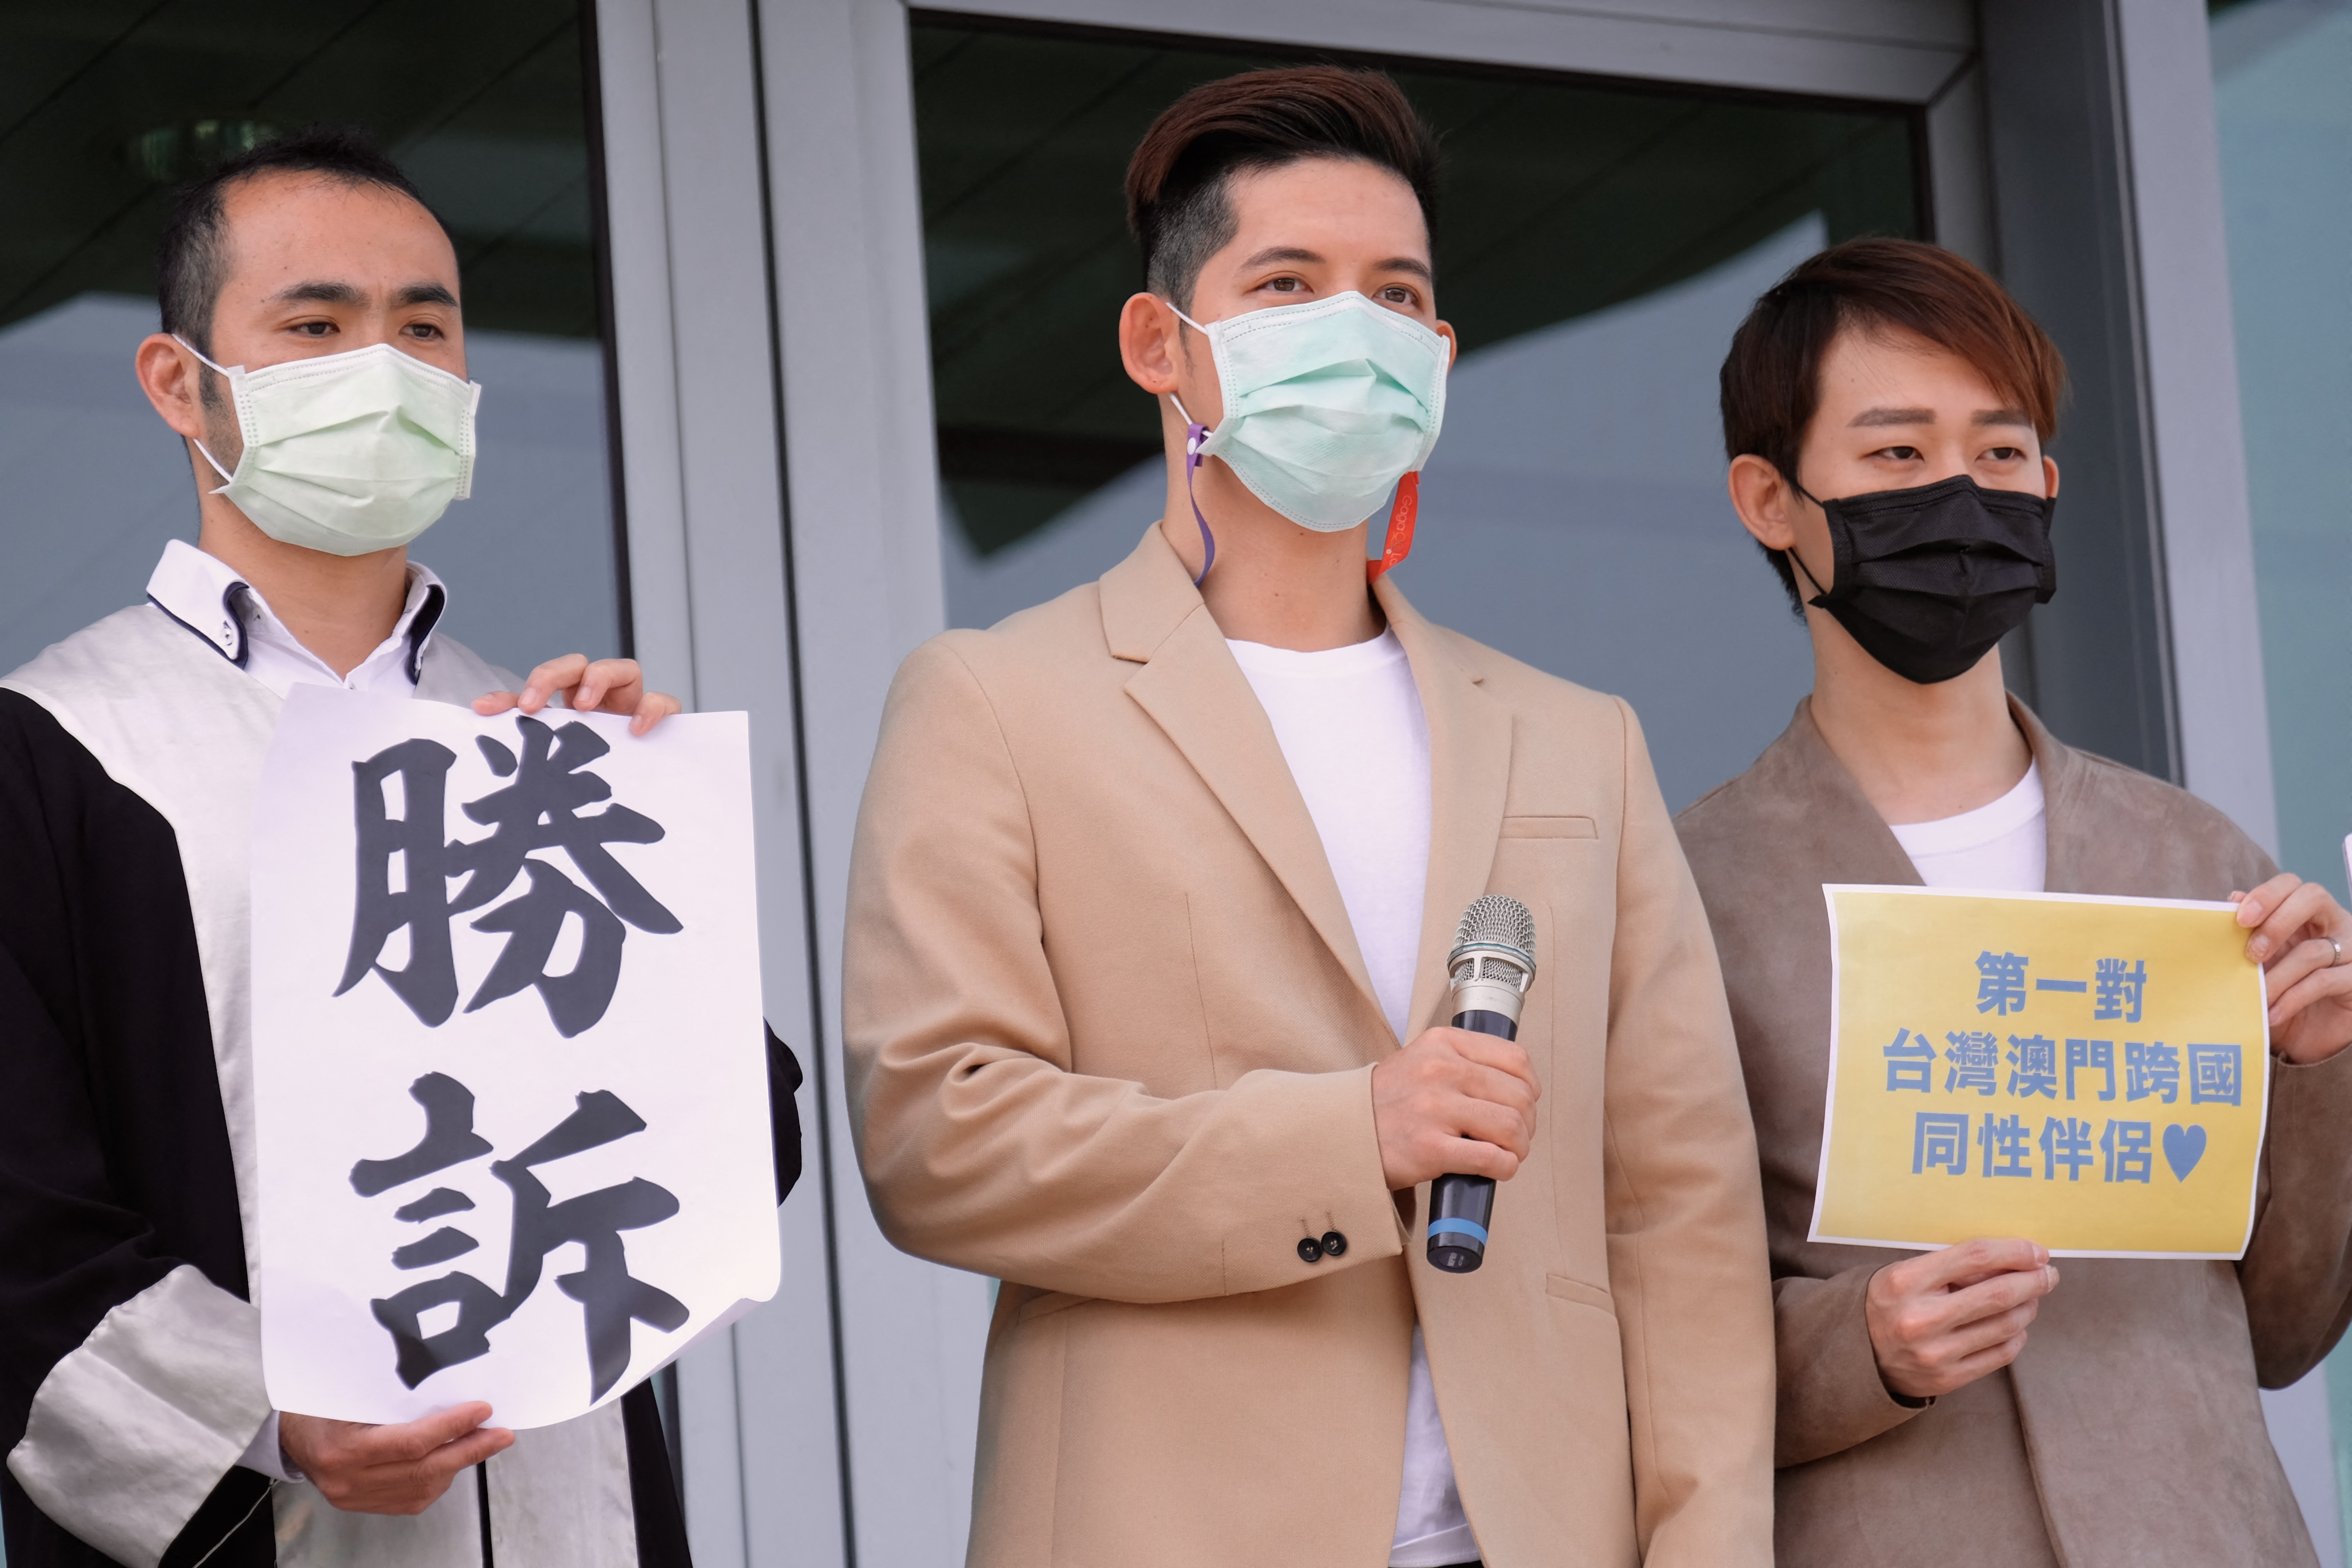 Taiwanese Ting Tse-yen (R) and his Macau same sex partner Leong Chin-fai (C) take part in a press conference in front of Taipei High Administrative Court after winning the lawsuit. The man with lawyers suit holds a sign reading  wins the lawsuit case.